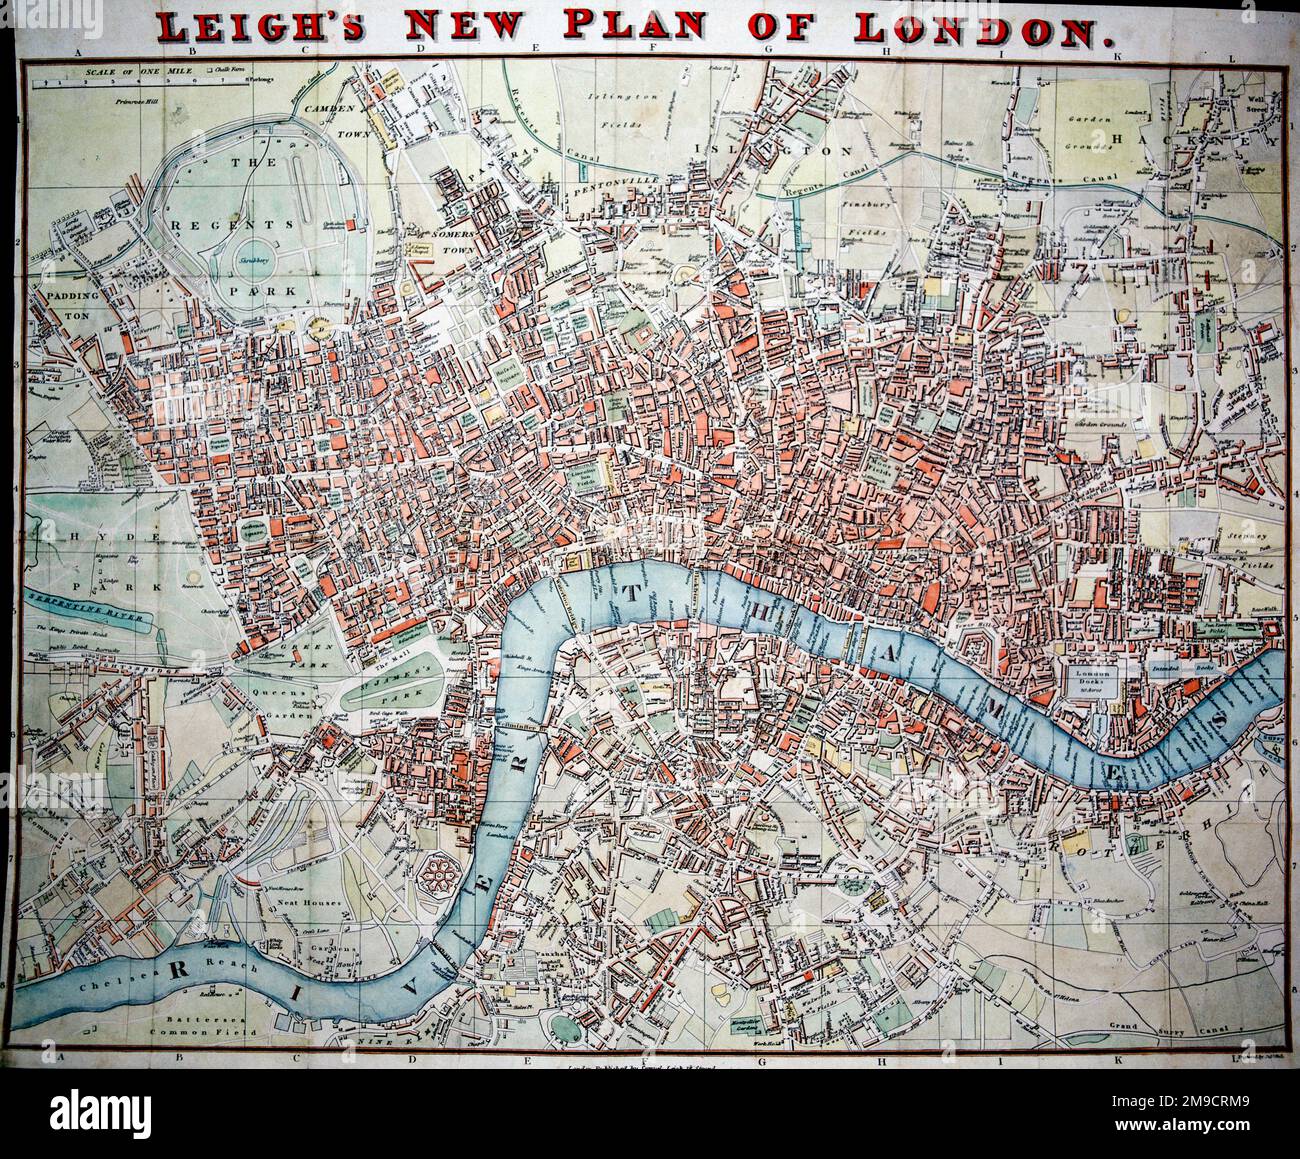 Leigh's New Plan of London, England Stock Photo